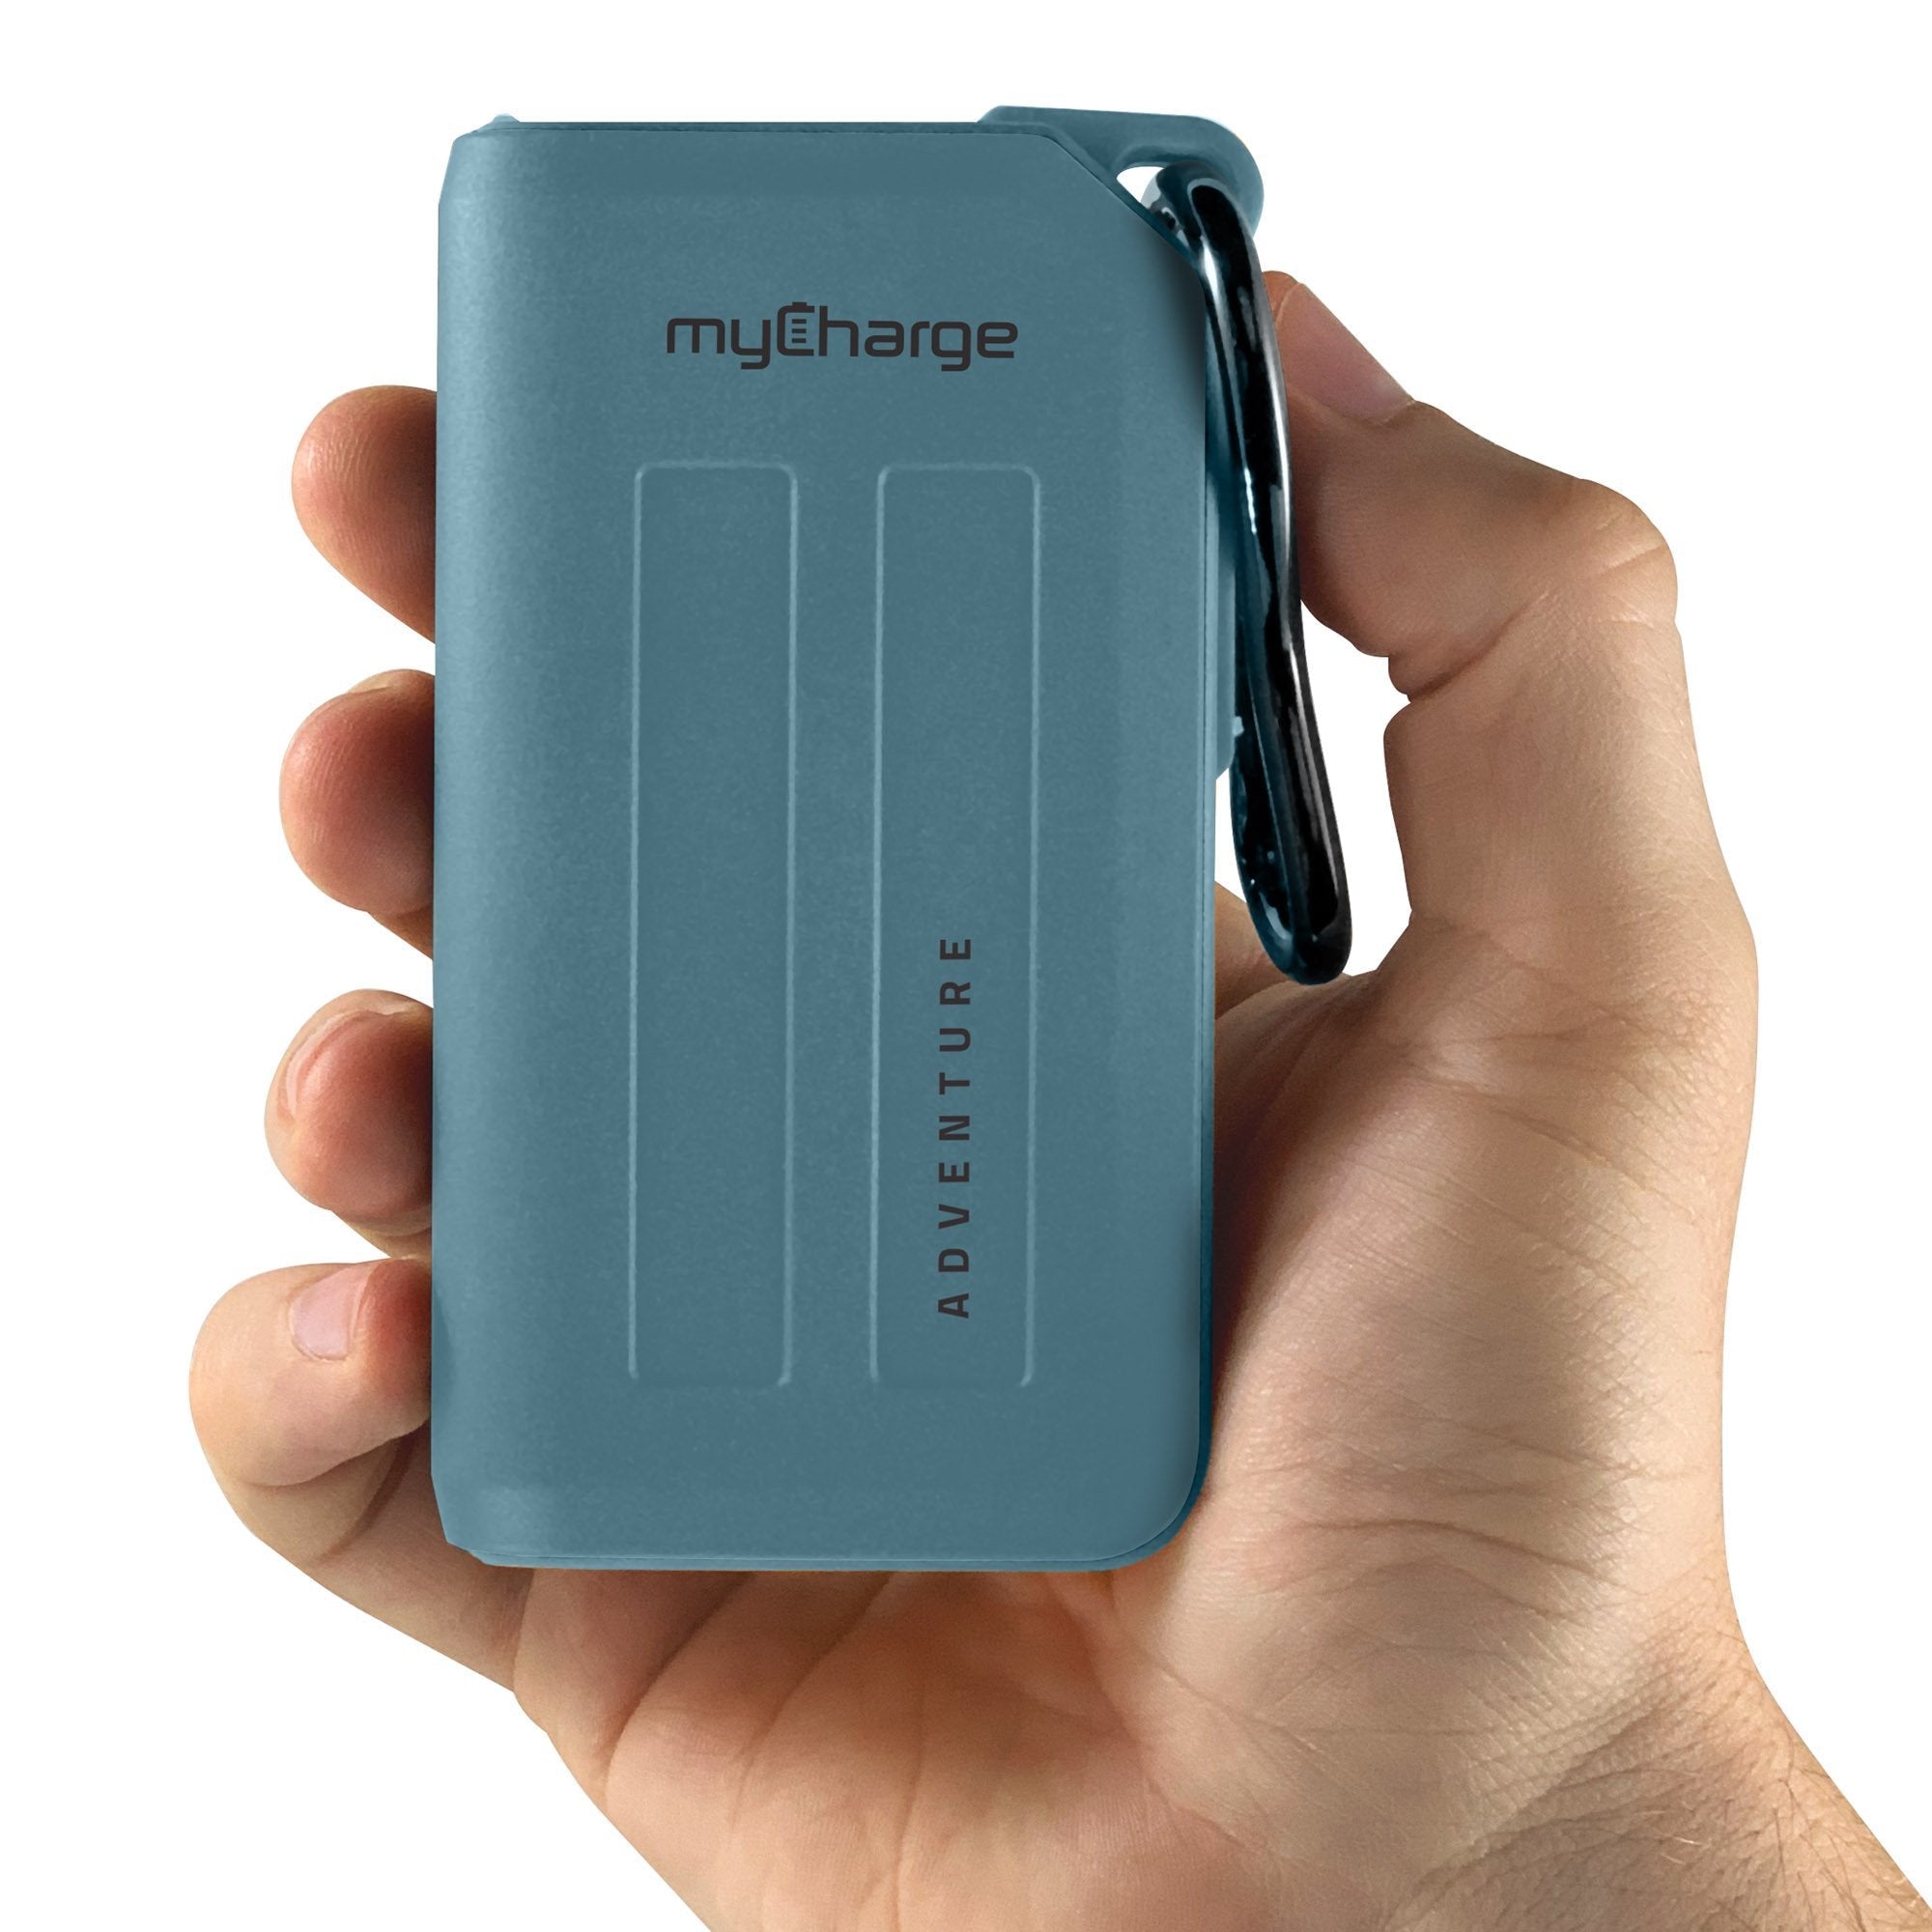 Adventure H20 10050 Rugged, Durable, Waterproof Portable Phone Charger -  myCharge